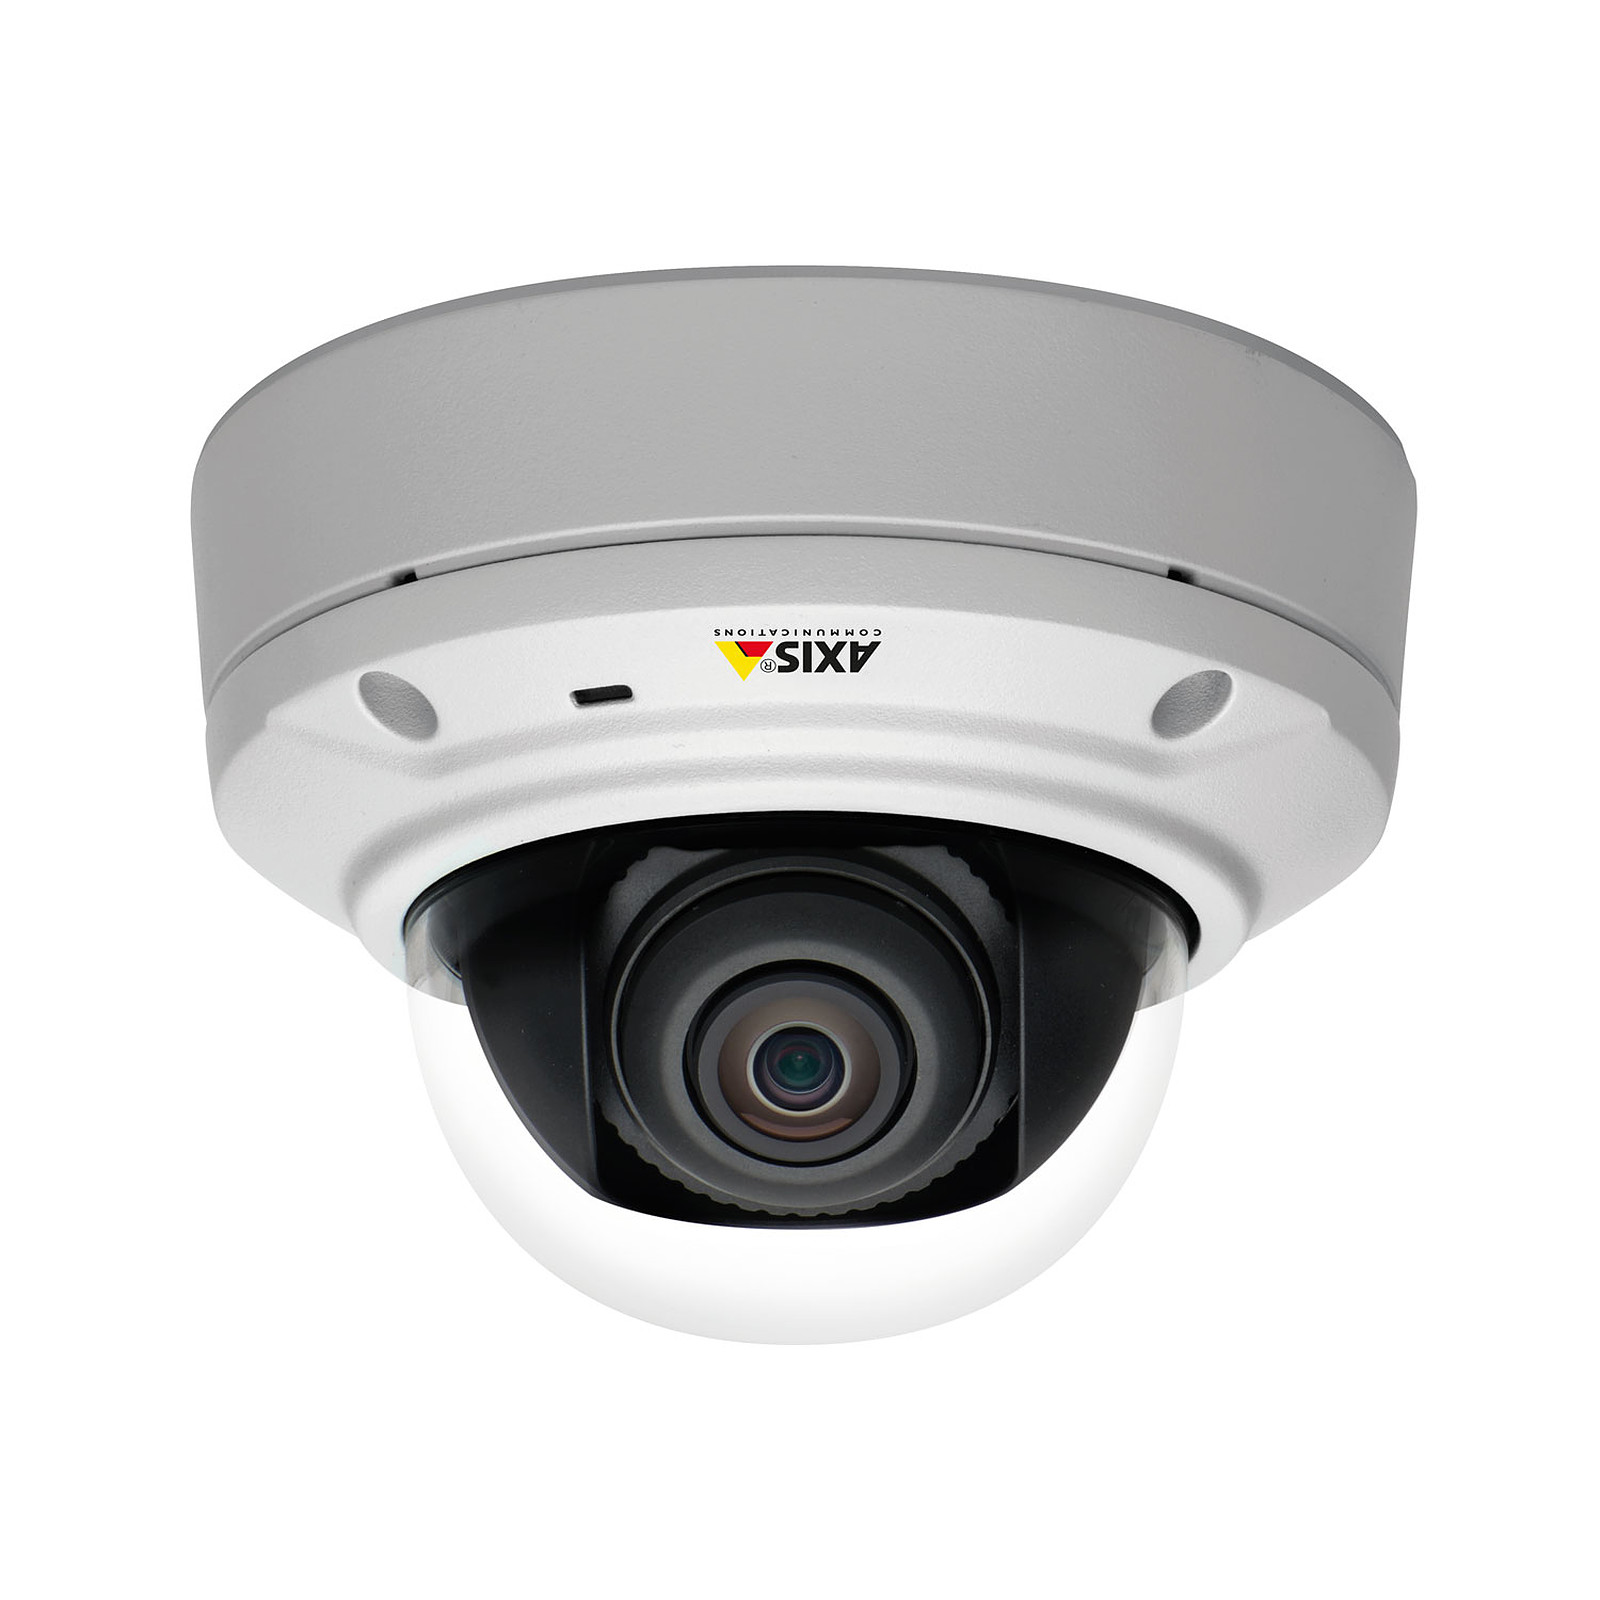 AXIS M3026-VE - Camera IP AXIS